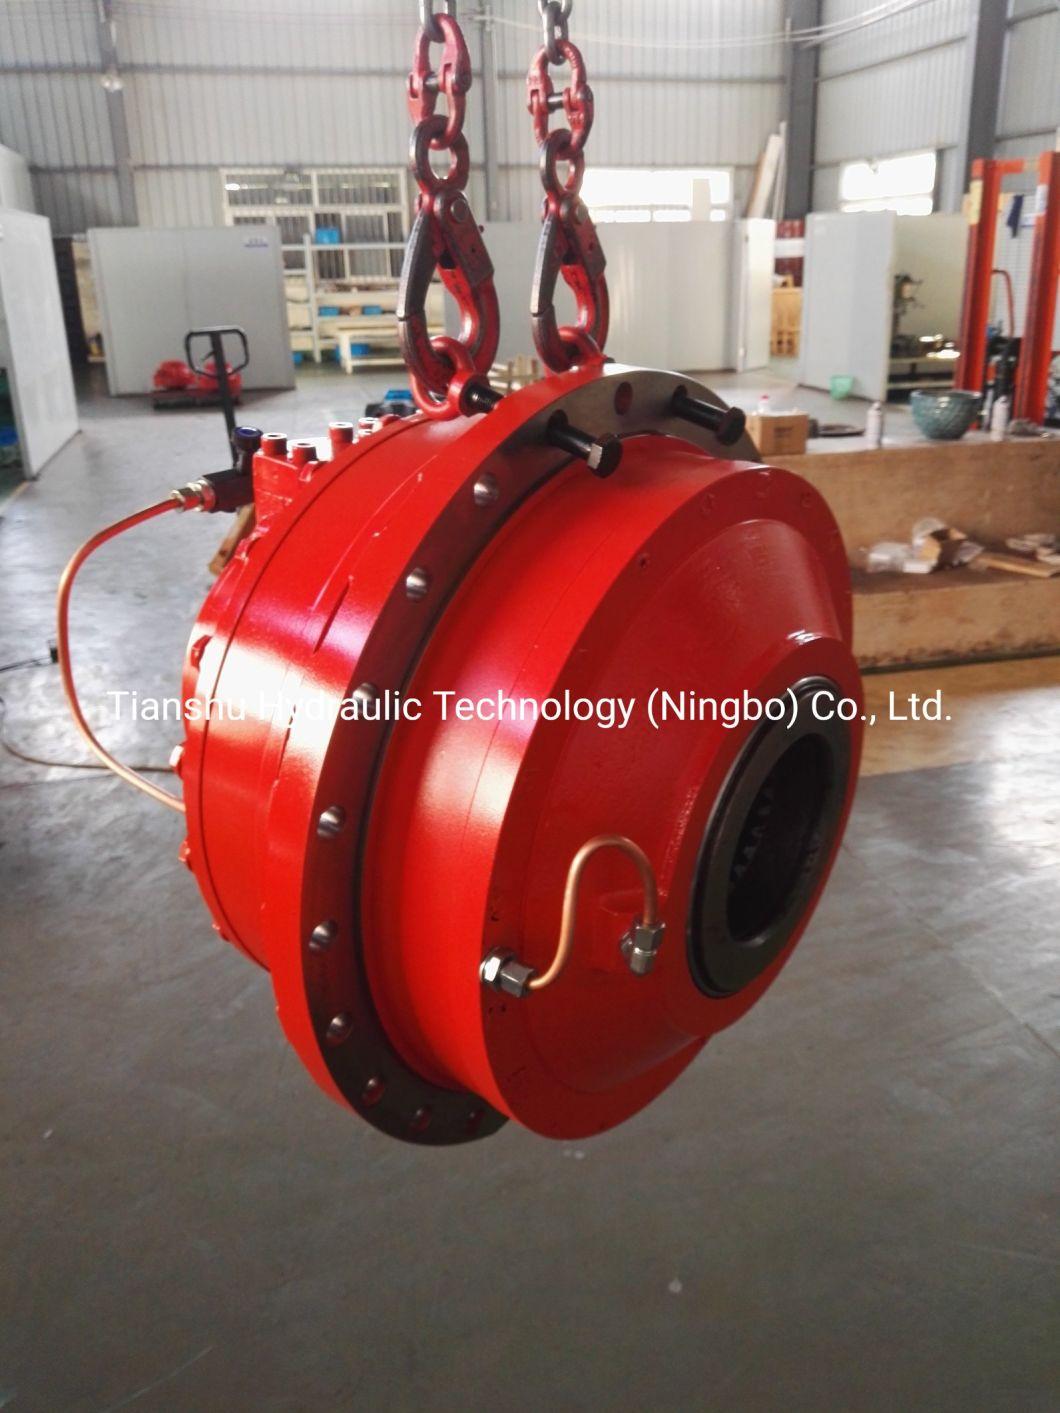 Rexroth Hagglunds Hydraulic Oil Motor Ca70 Ca140 Ca210 with Brake for Winch and Anchor Motor.